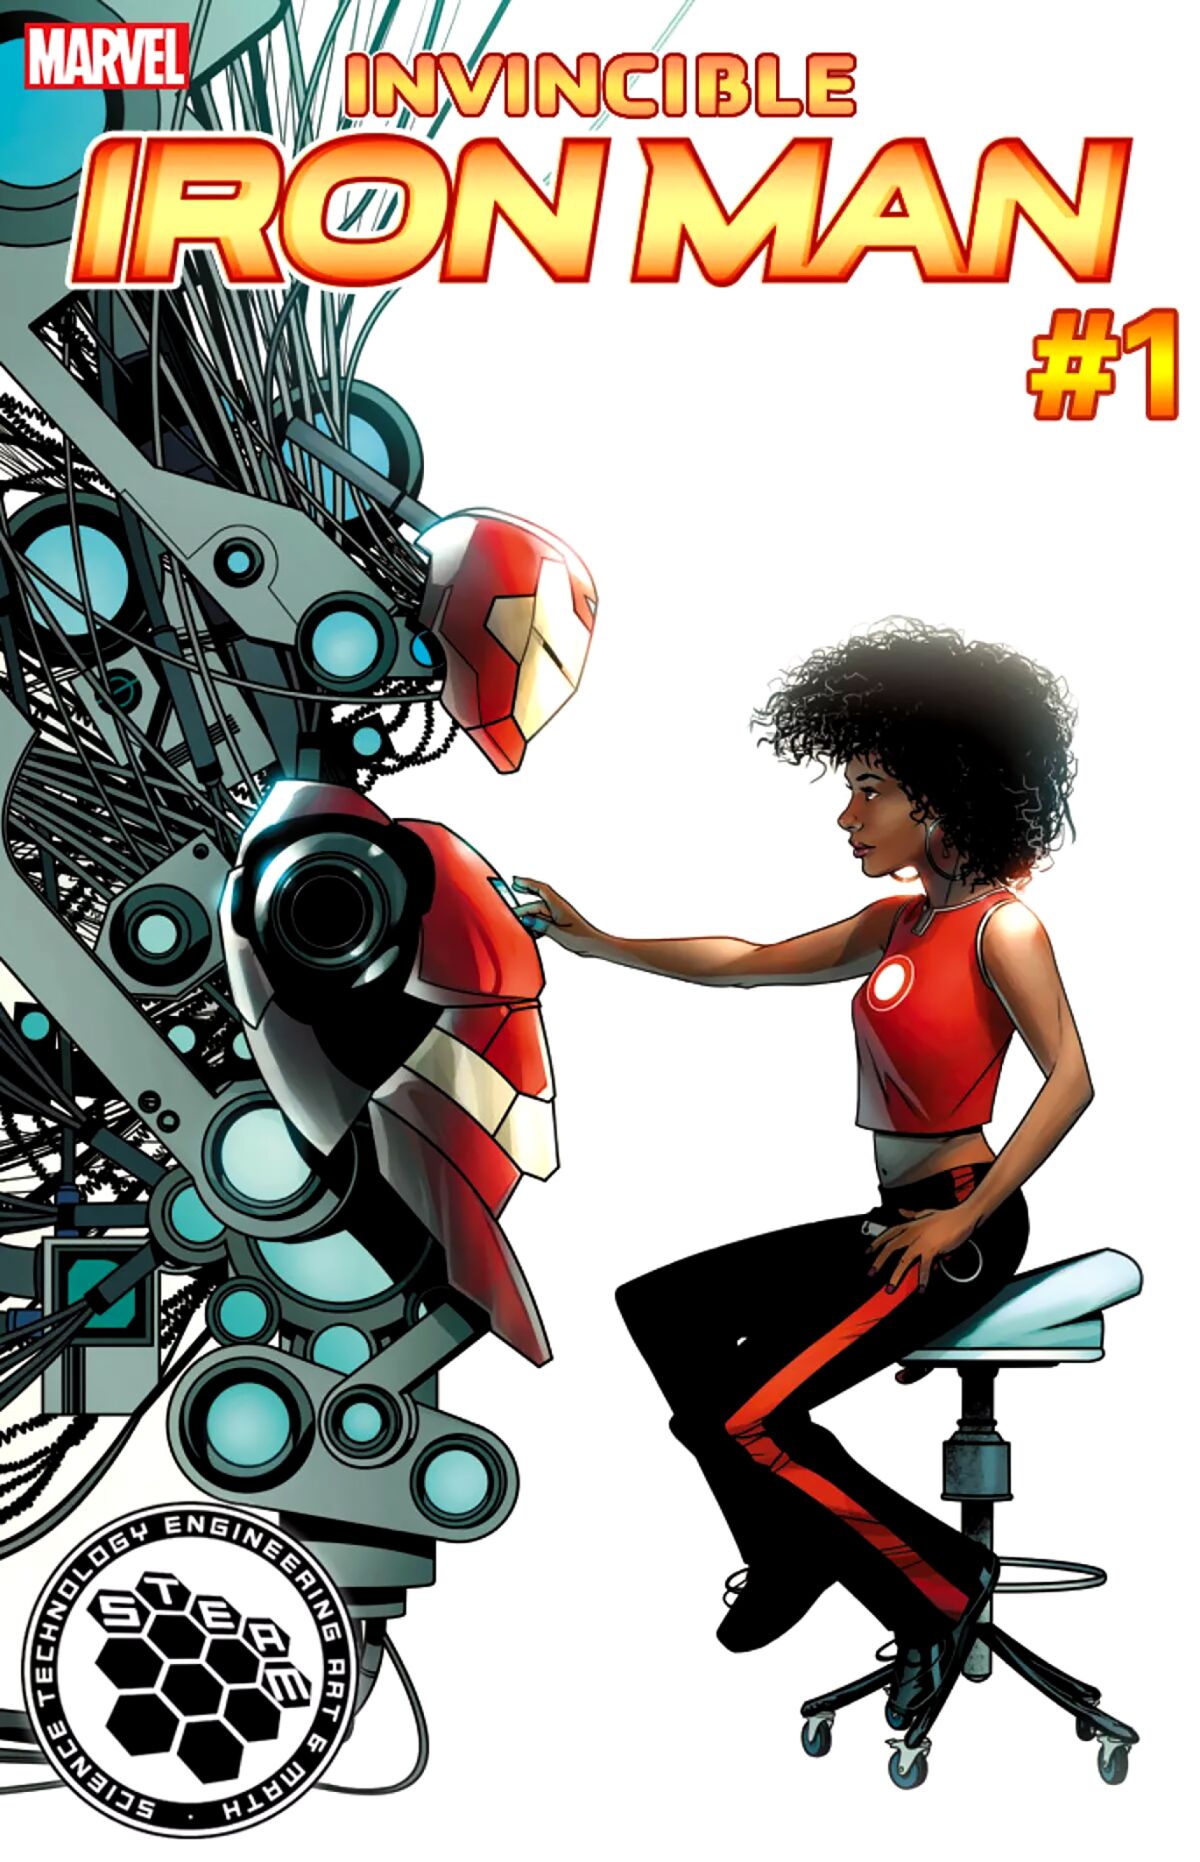 comic book cover image of a woman in a chair touching a suit of high-tech armor